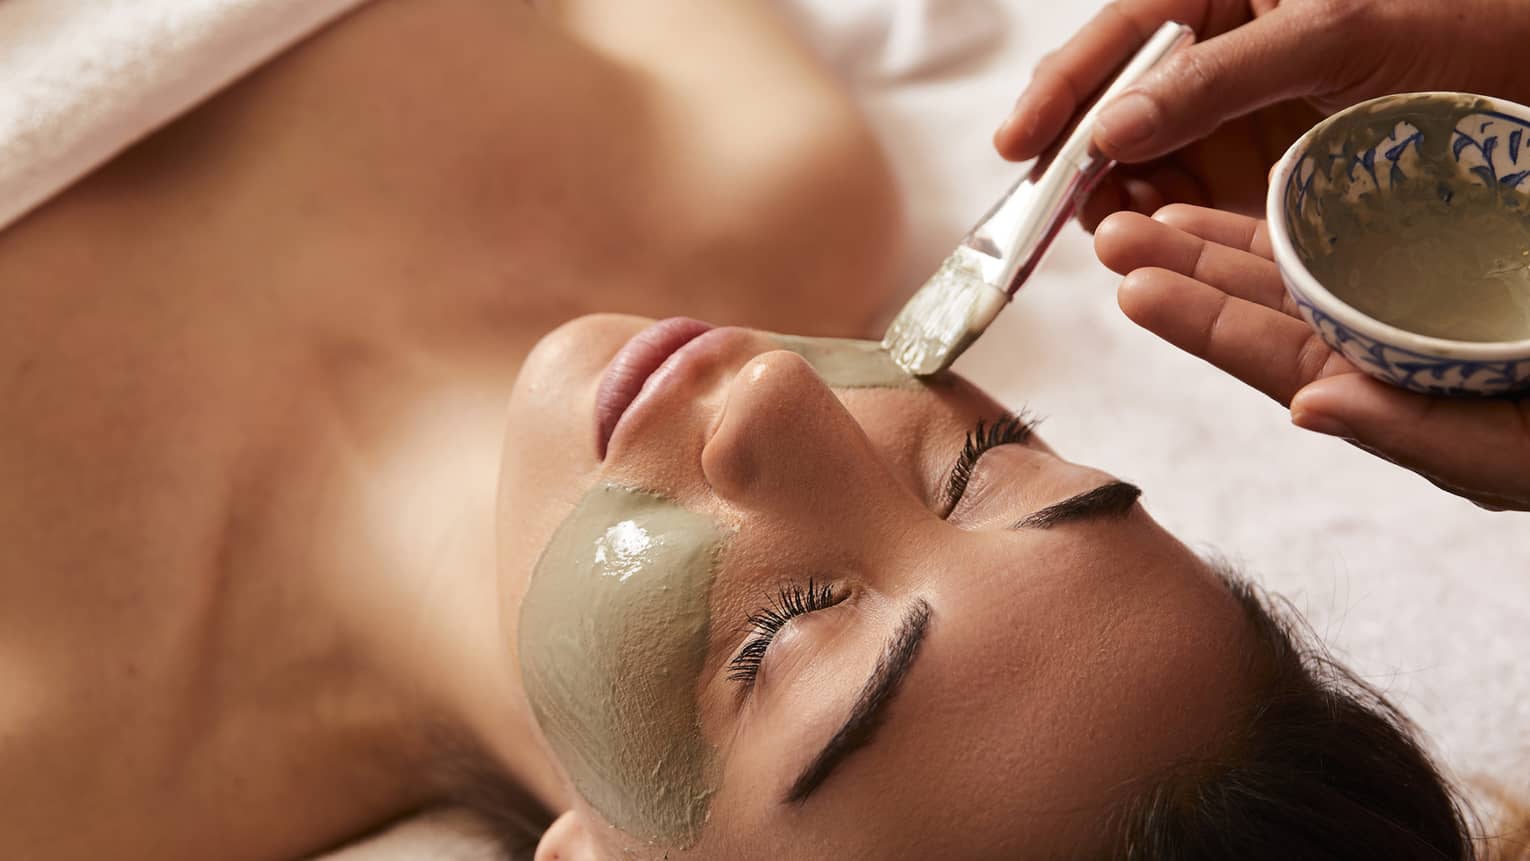 Spa attendant paints clay mask onto woman's face with brush in spa treatment room